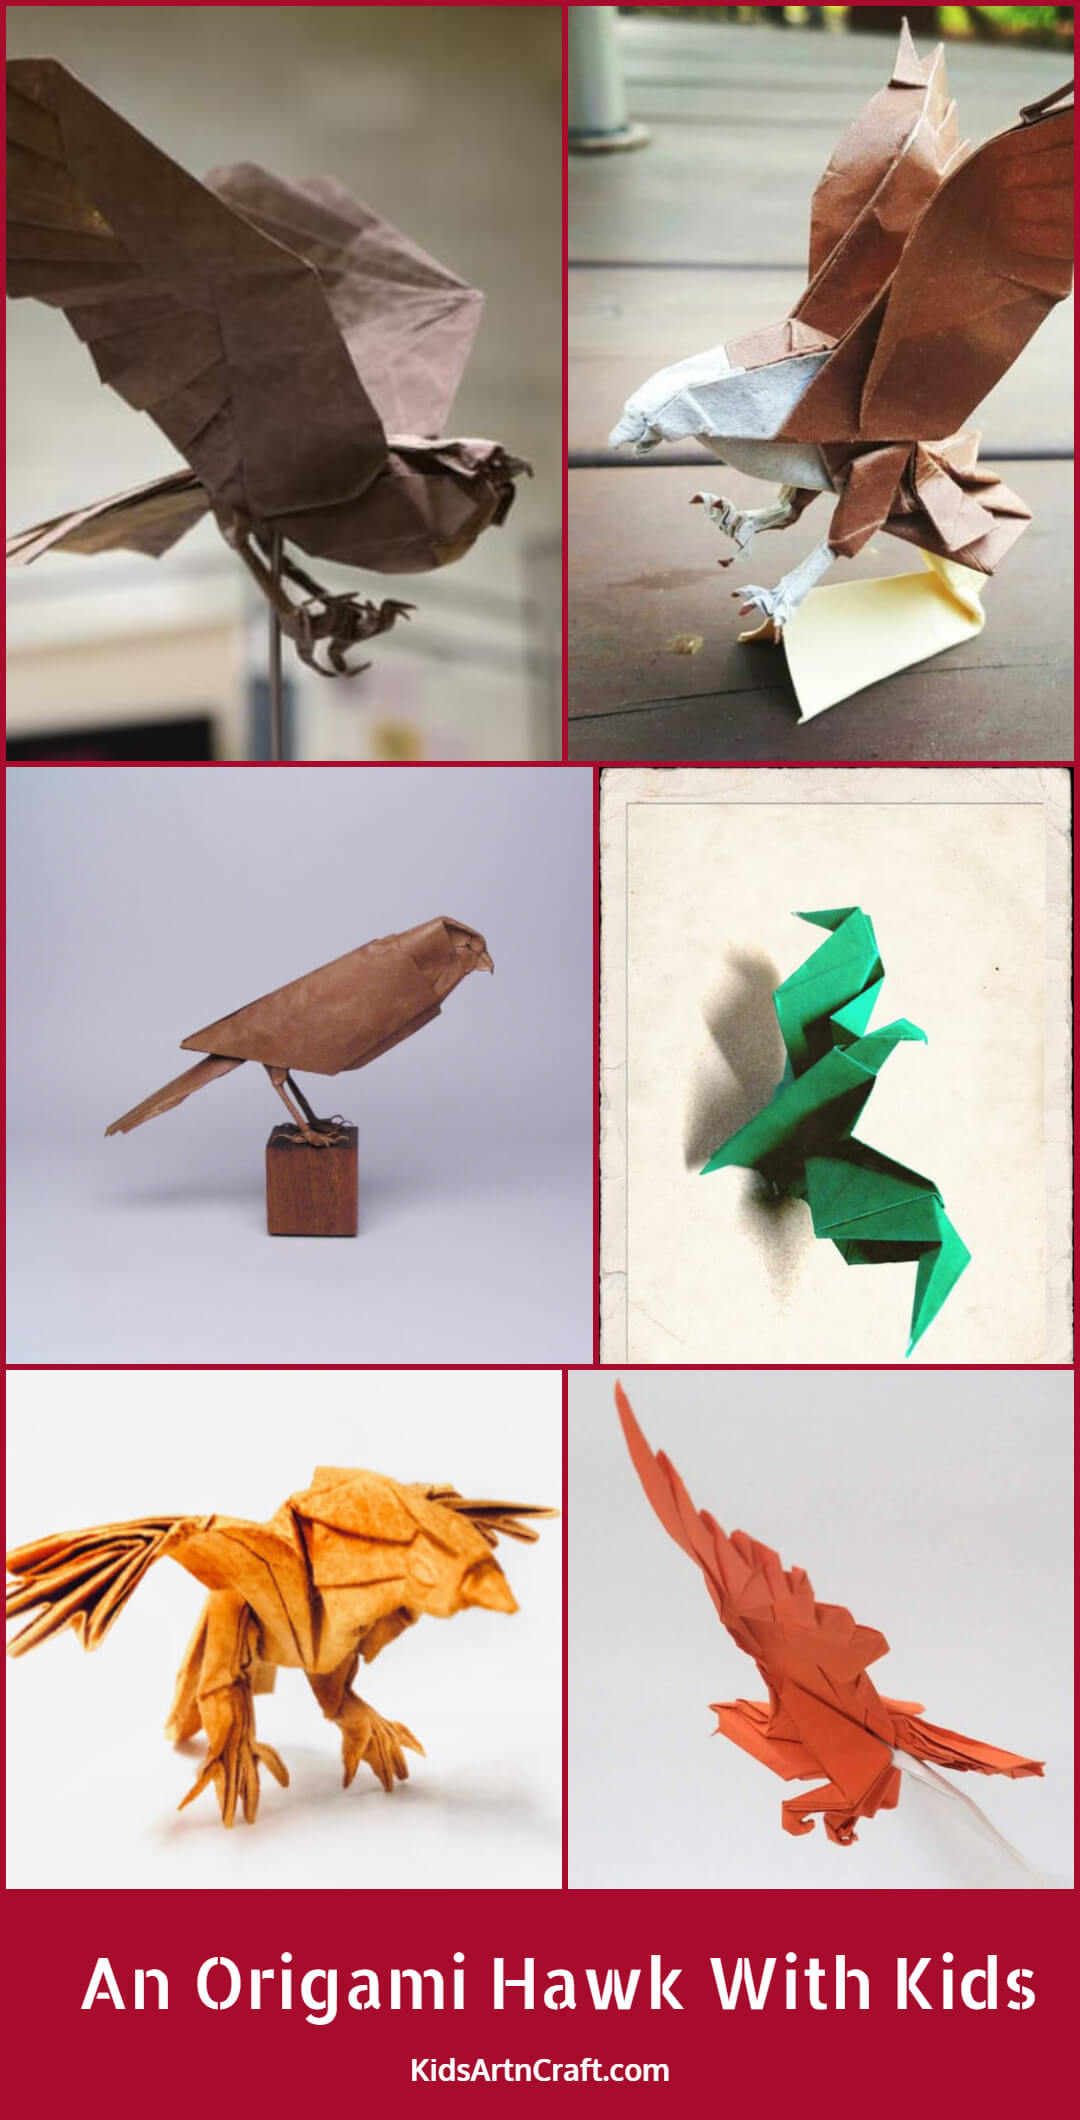 How To Make An Origami Hawk With Kids